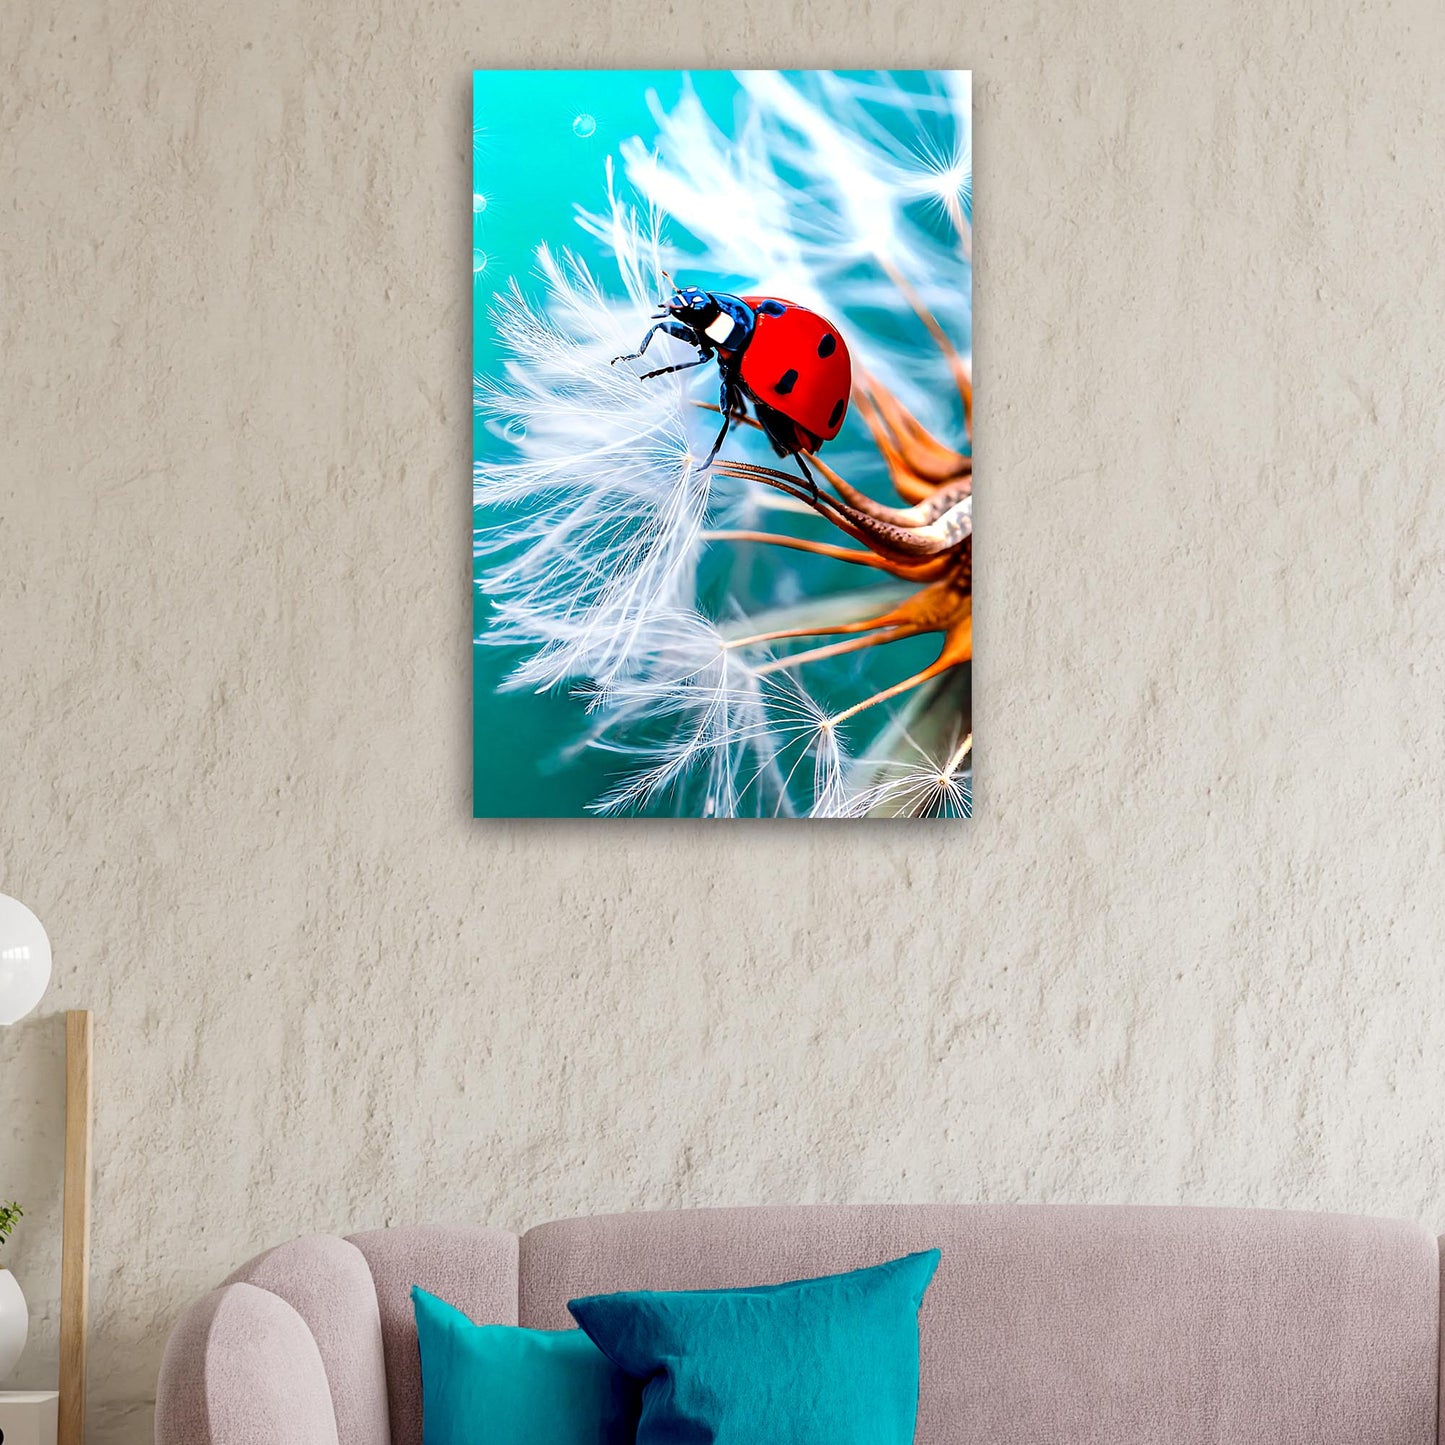 Insect Ladybug Dandelion Flower Canvas Wall Art Style 2 - Image by Tailored Canvases